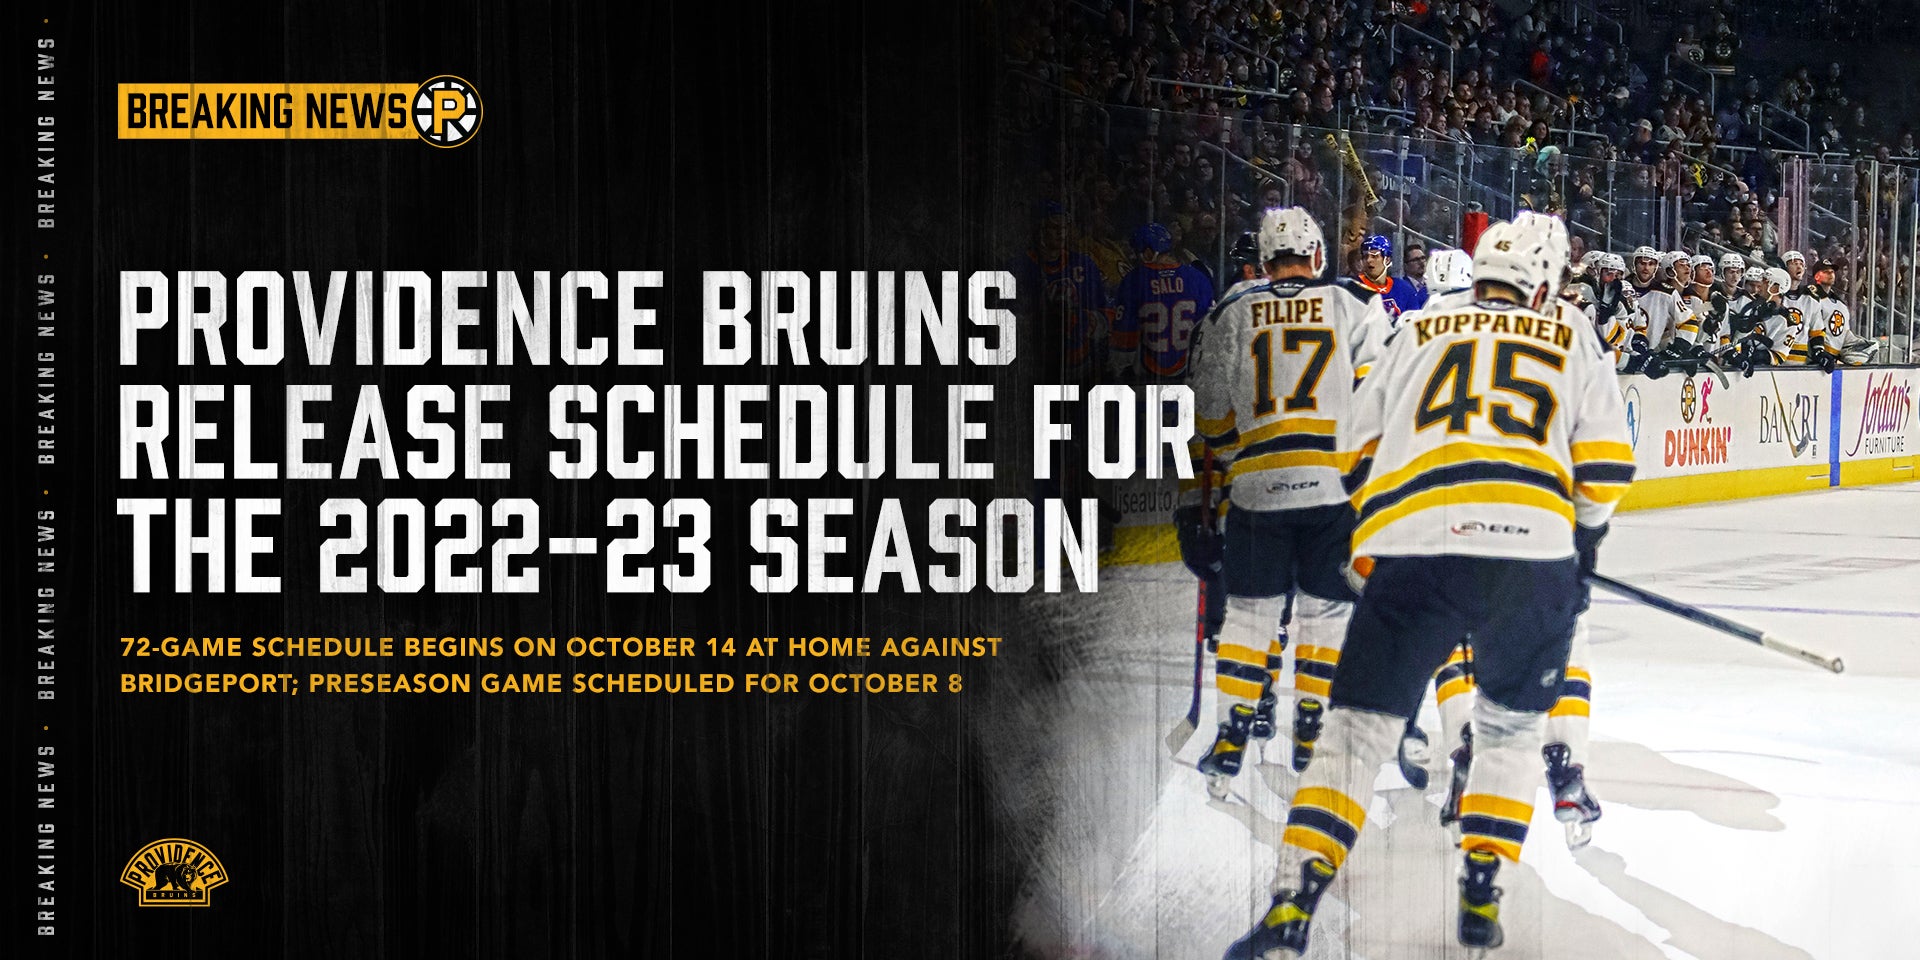 P-BRUINS ANNOUNCE 2022-23 TICKETS ON SALE NOW